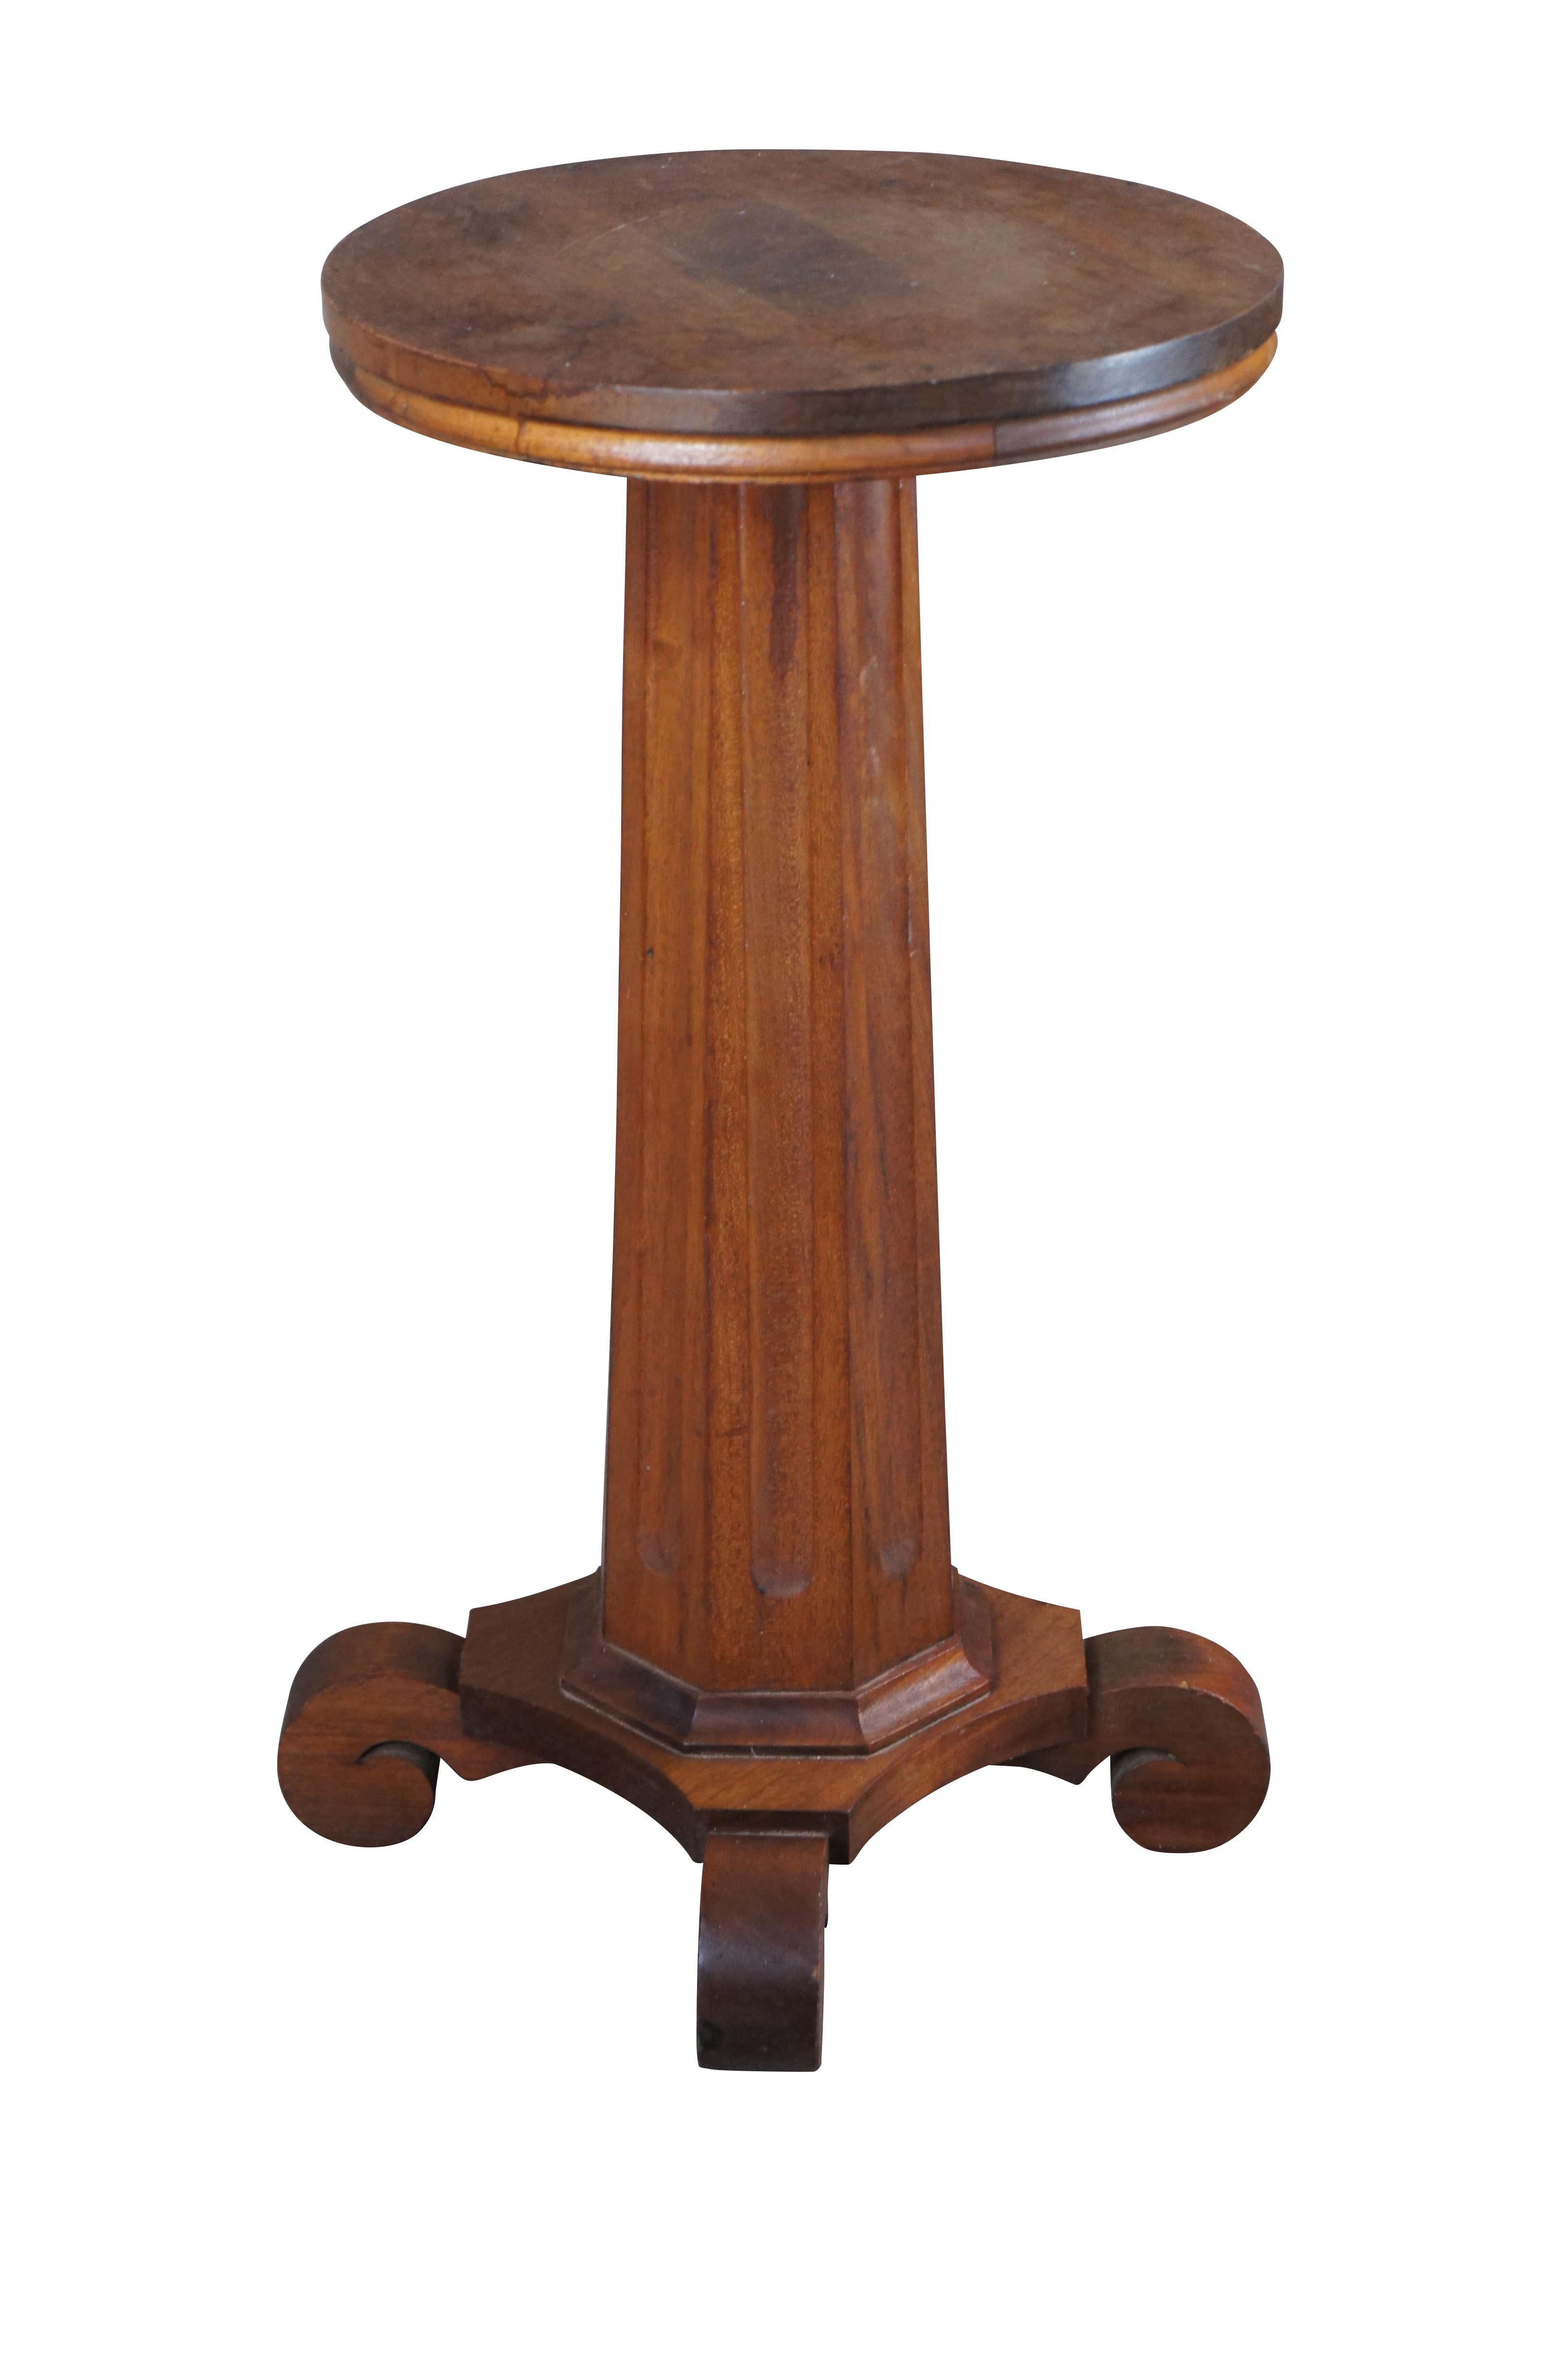 An antique 19th century American Classical / Empire pedestal table or sculpture / candle stand. Made from solid mahogany with a round top over fluted octagonal column graduating towards a 